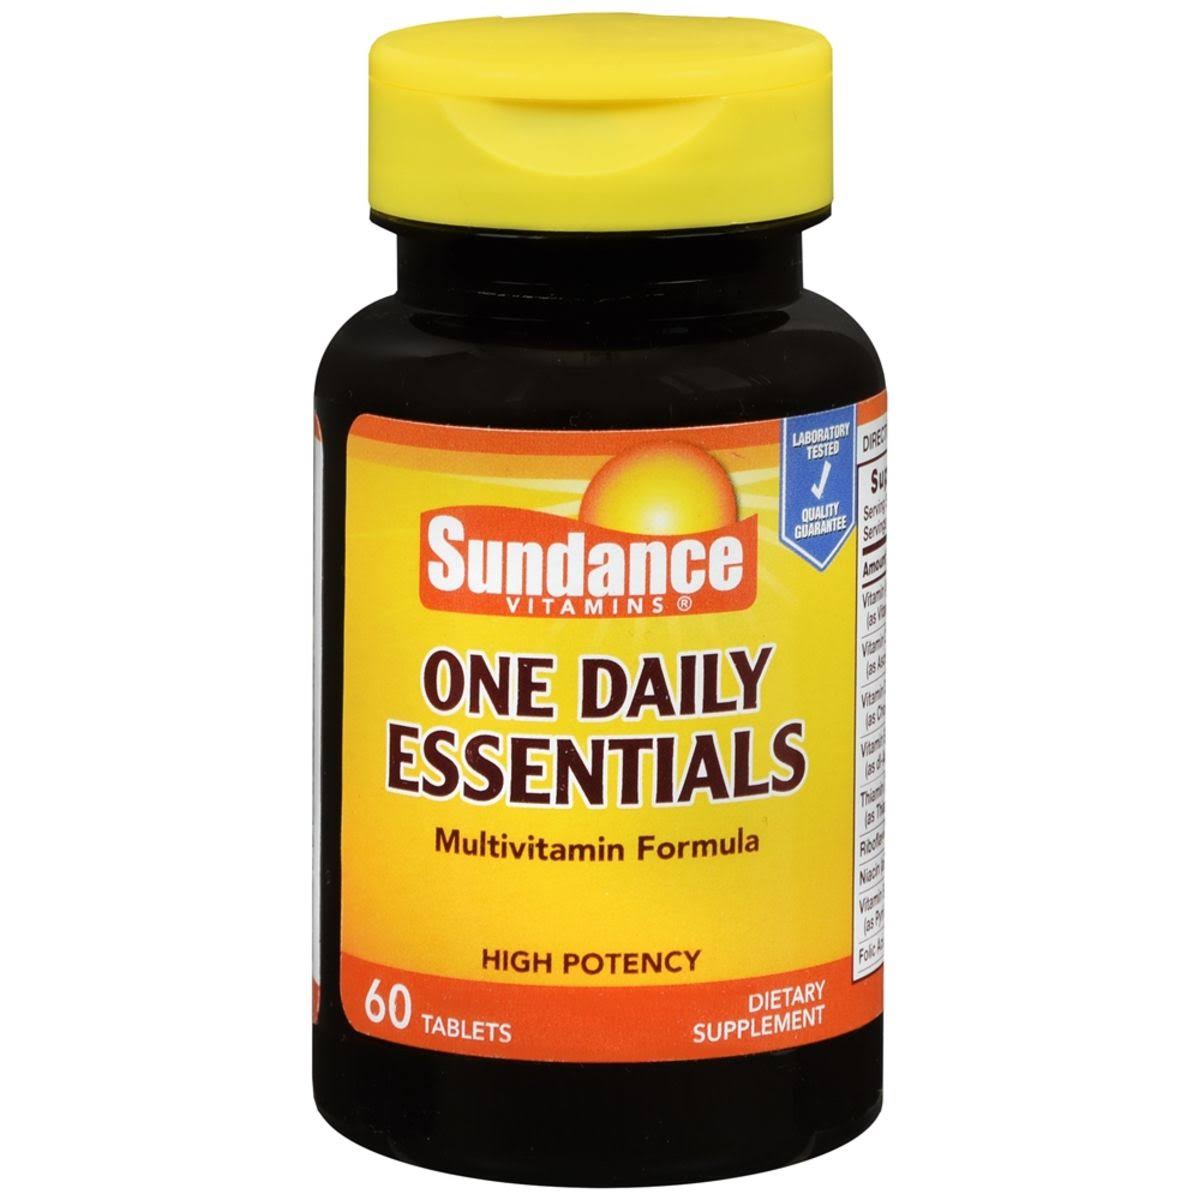 Sundance One Daily Essentials - 60 Tablets